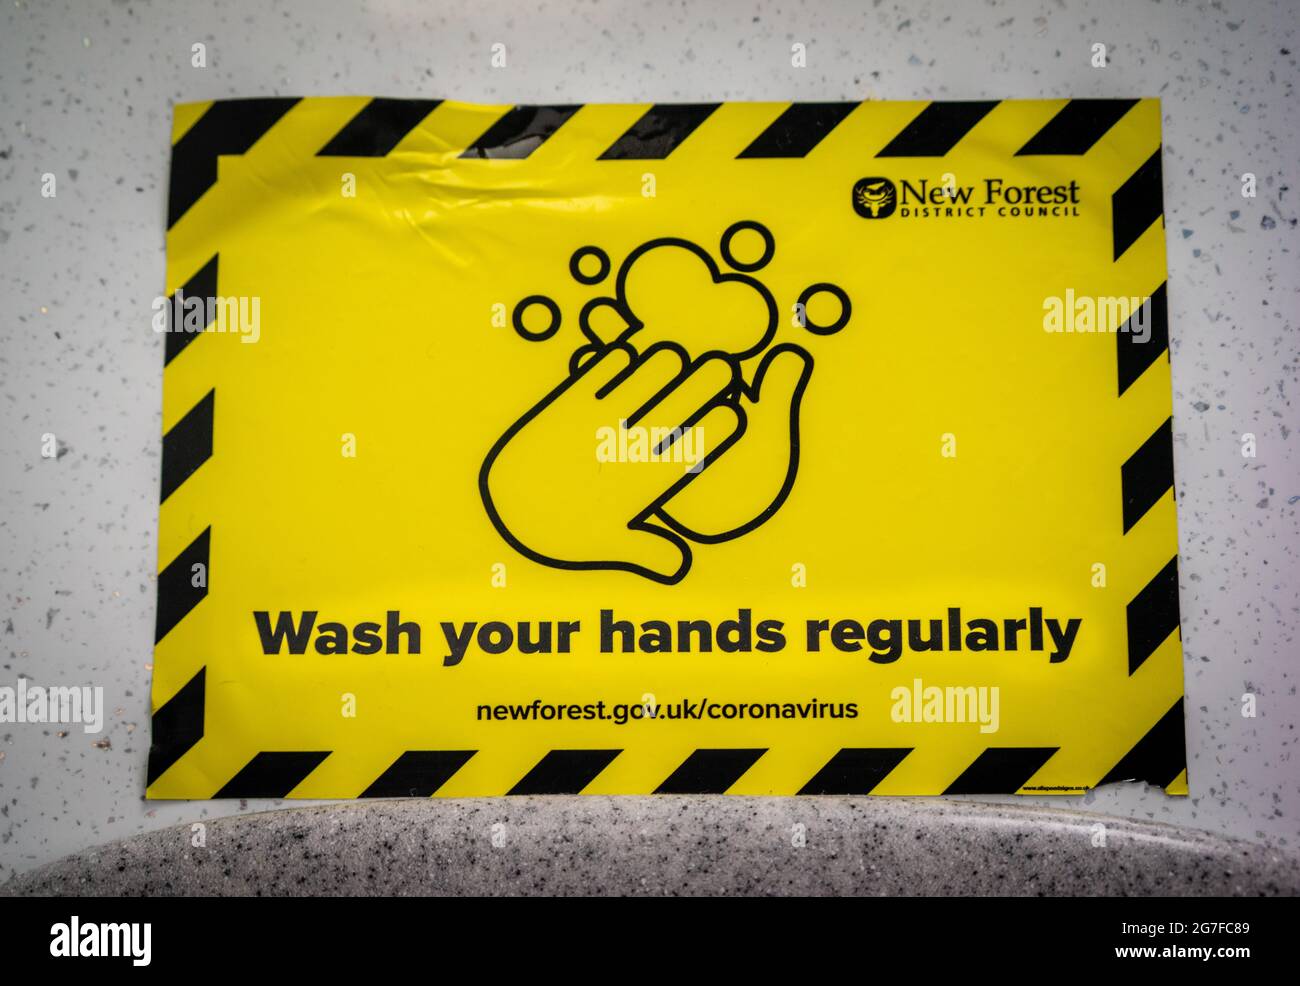 Wash your hands regularly sign in a public toilet during the coronavirus pandemic 2021, England, UK Stock Photo